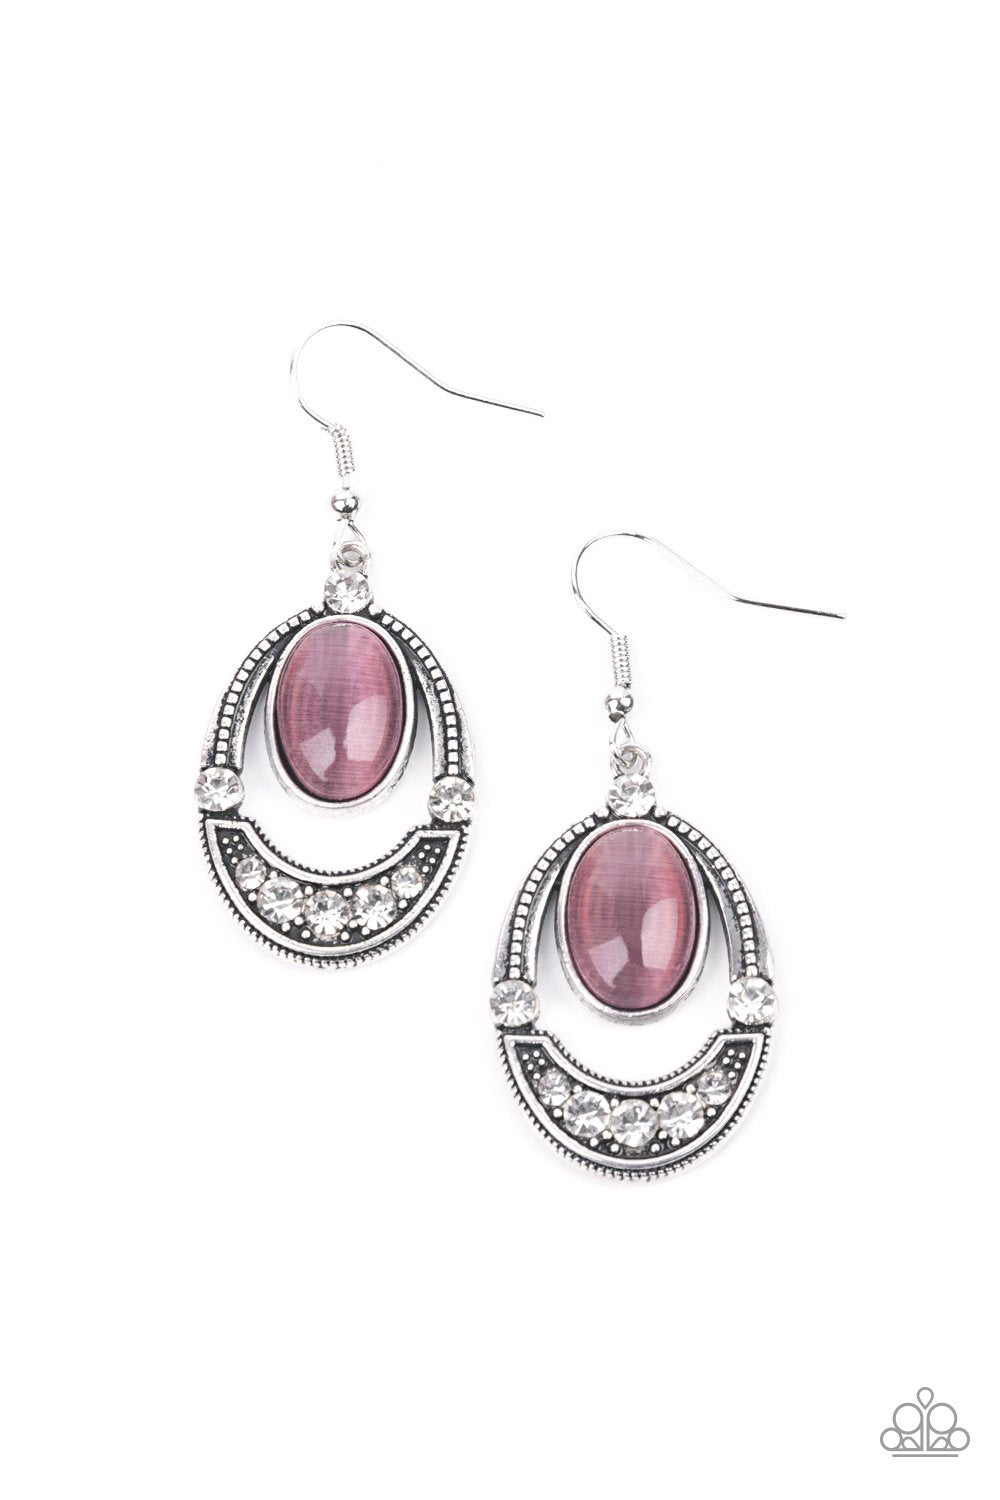 Serene Shimmer Purple Cat's Eye and White Rhinestone Earrings - Paparazzi Accessories- lightbox - CarasShop.com - $5 Jewelry by Cara Jewels